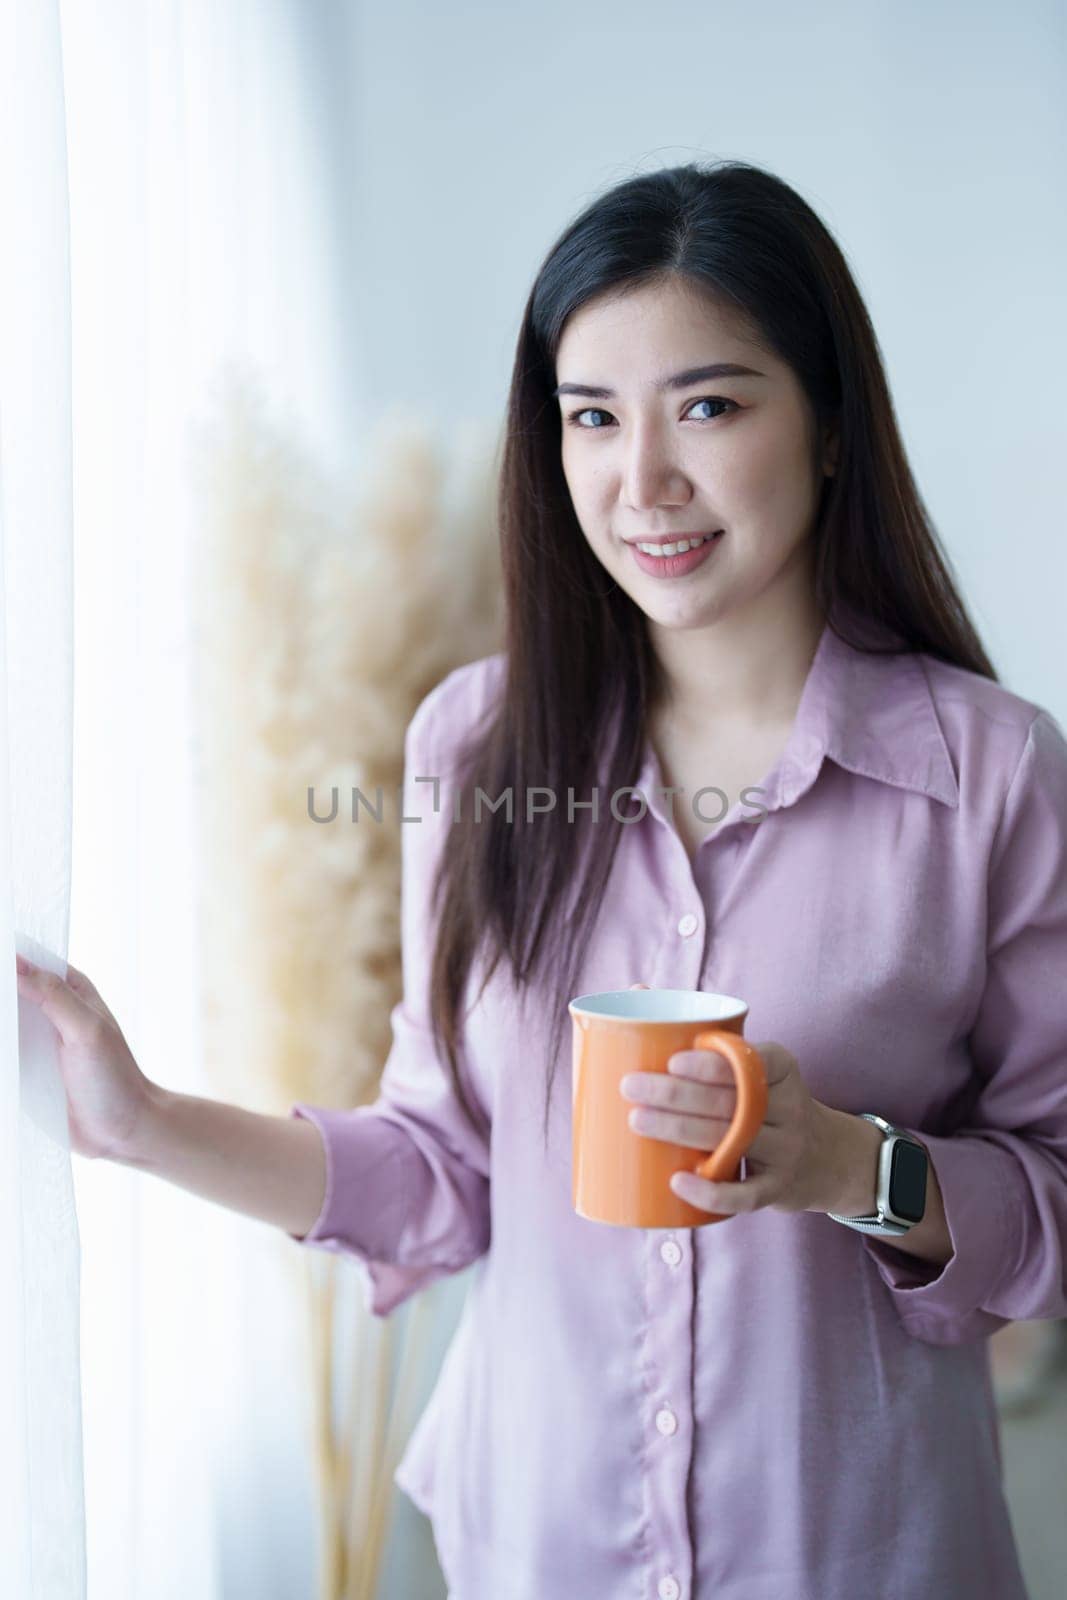 A portrait of a young Asian woman in pajamas smiling happily by a window with curtains in the morning sun while drinking coffee.